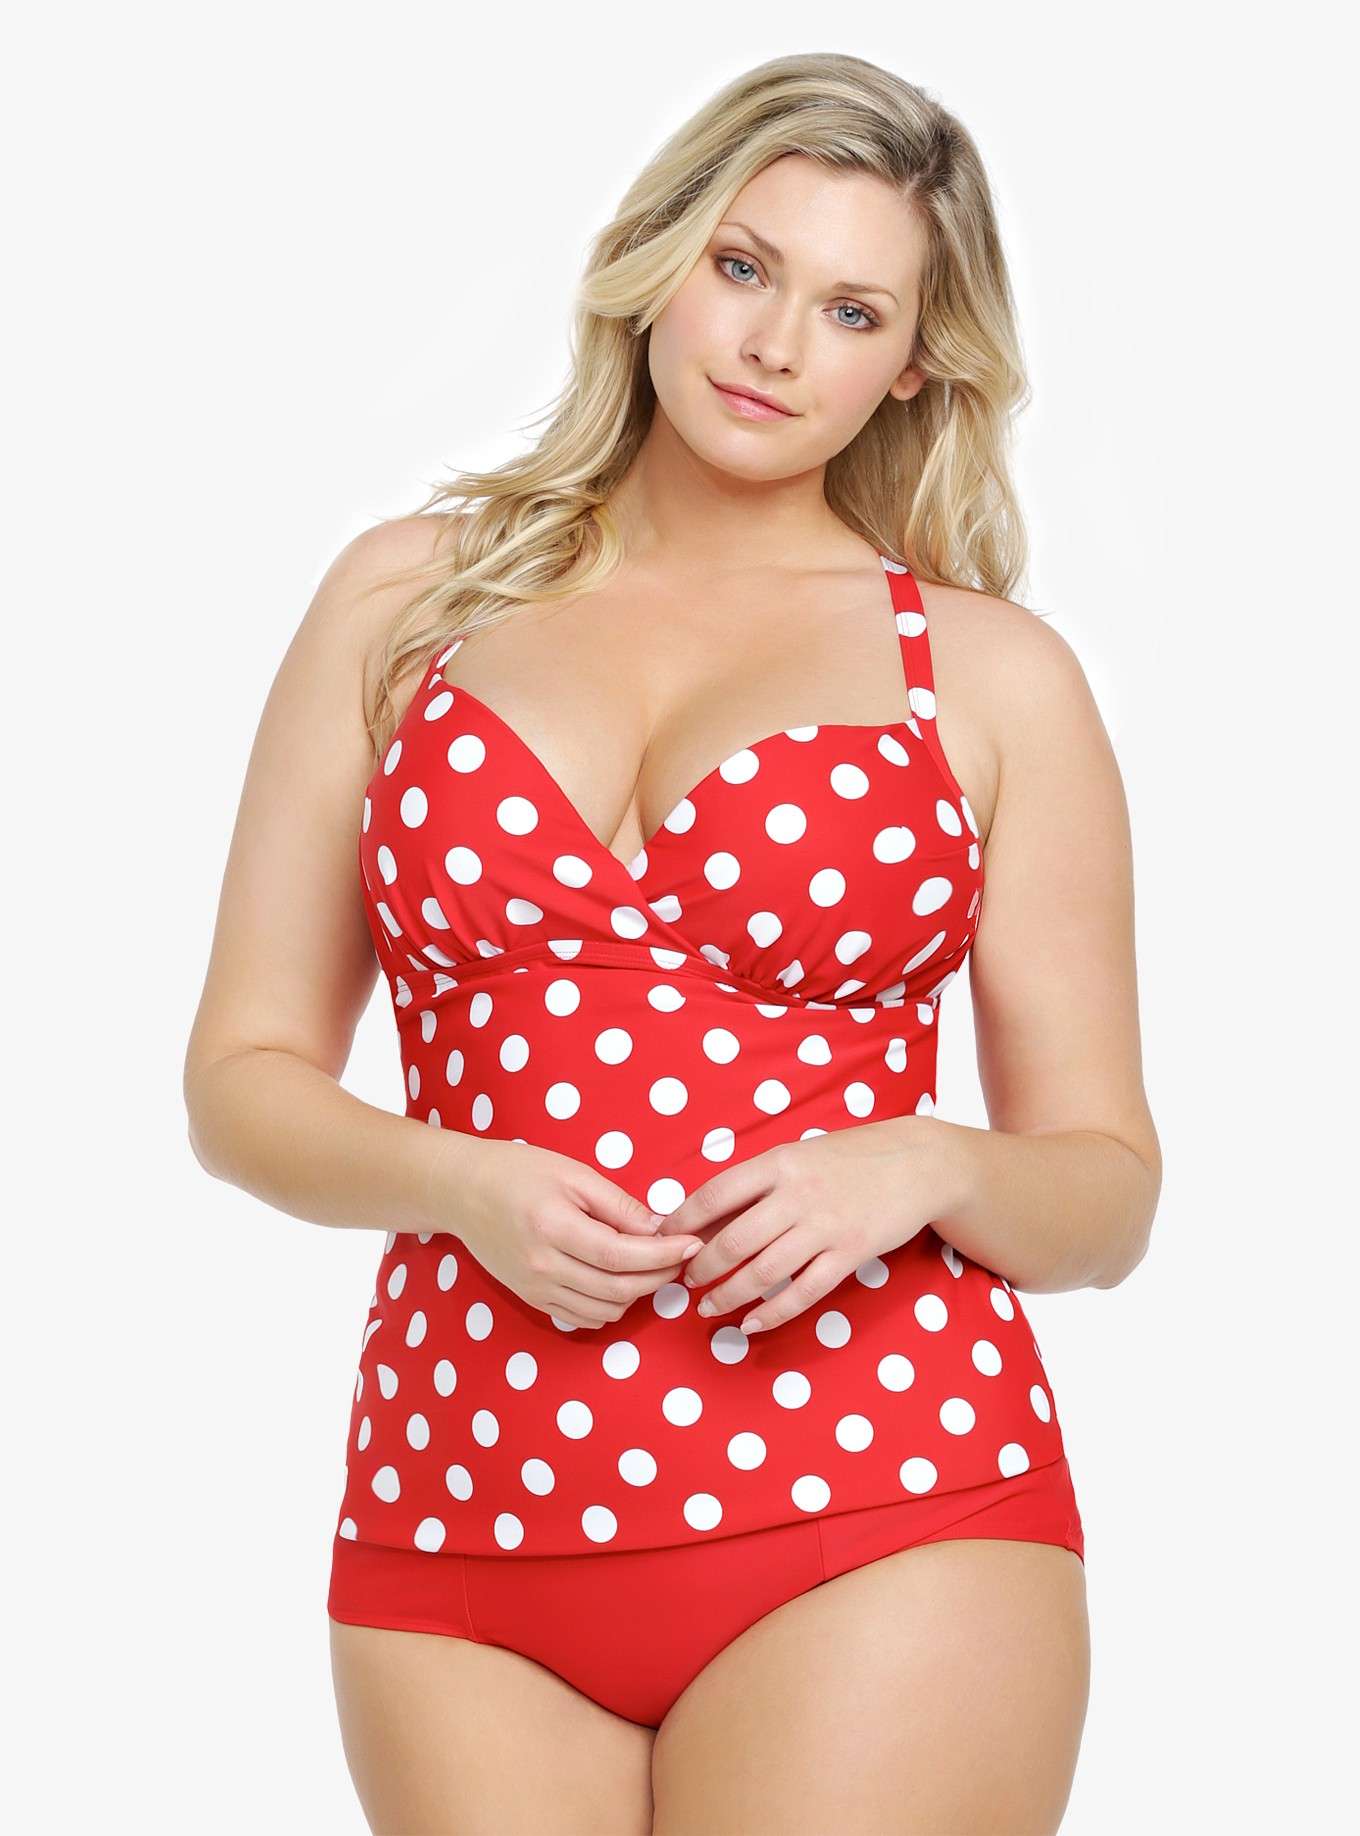 Costume rosso a pois bianchi